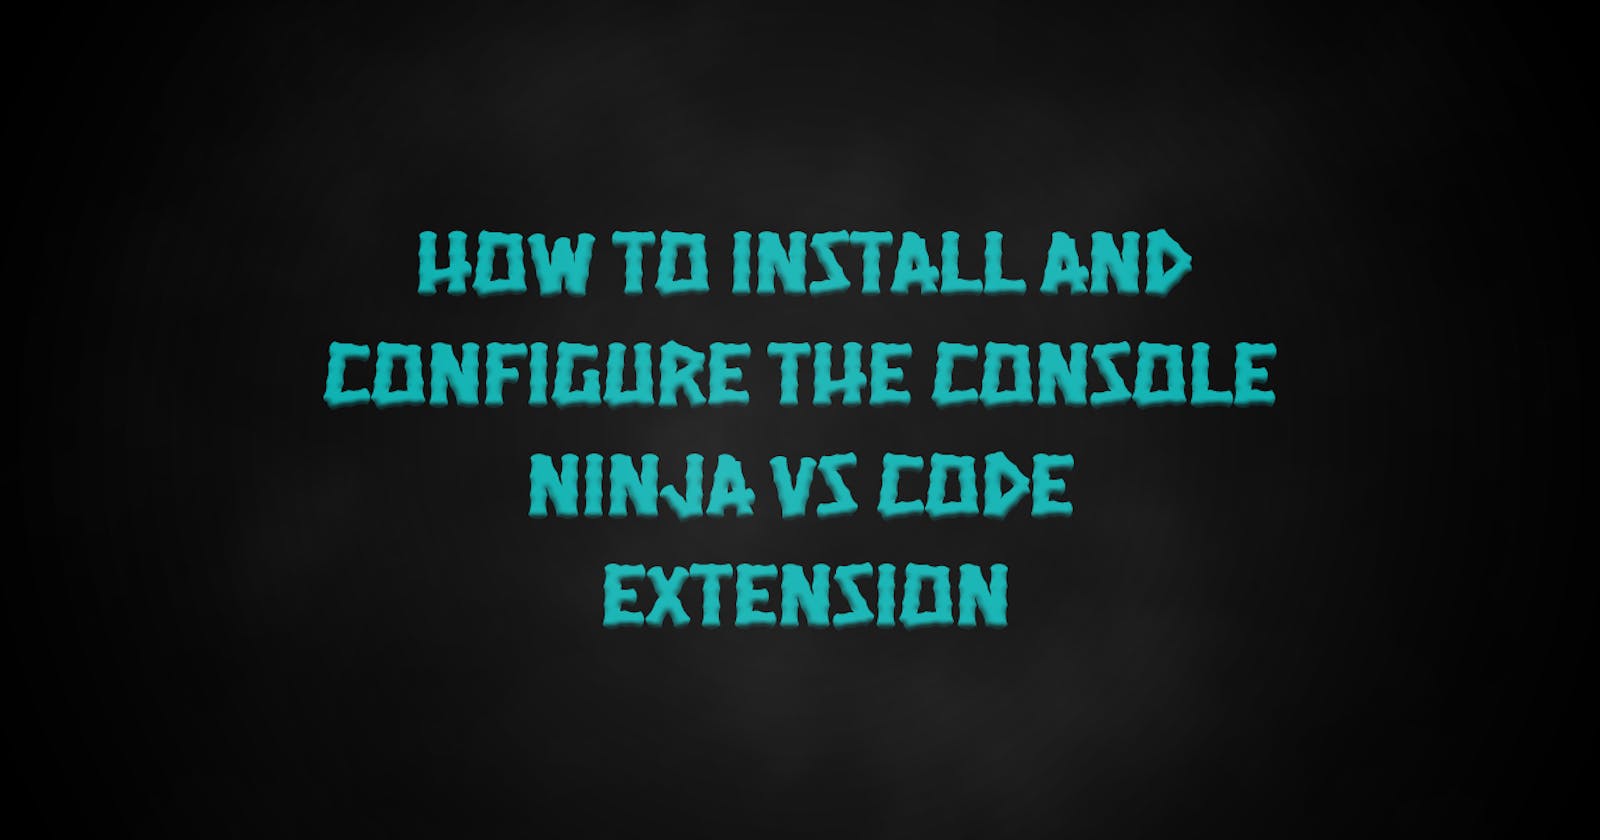 How to Install and configure the Console Ninja VsCode Extension